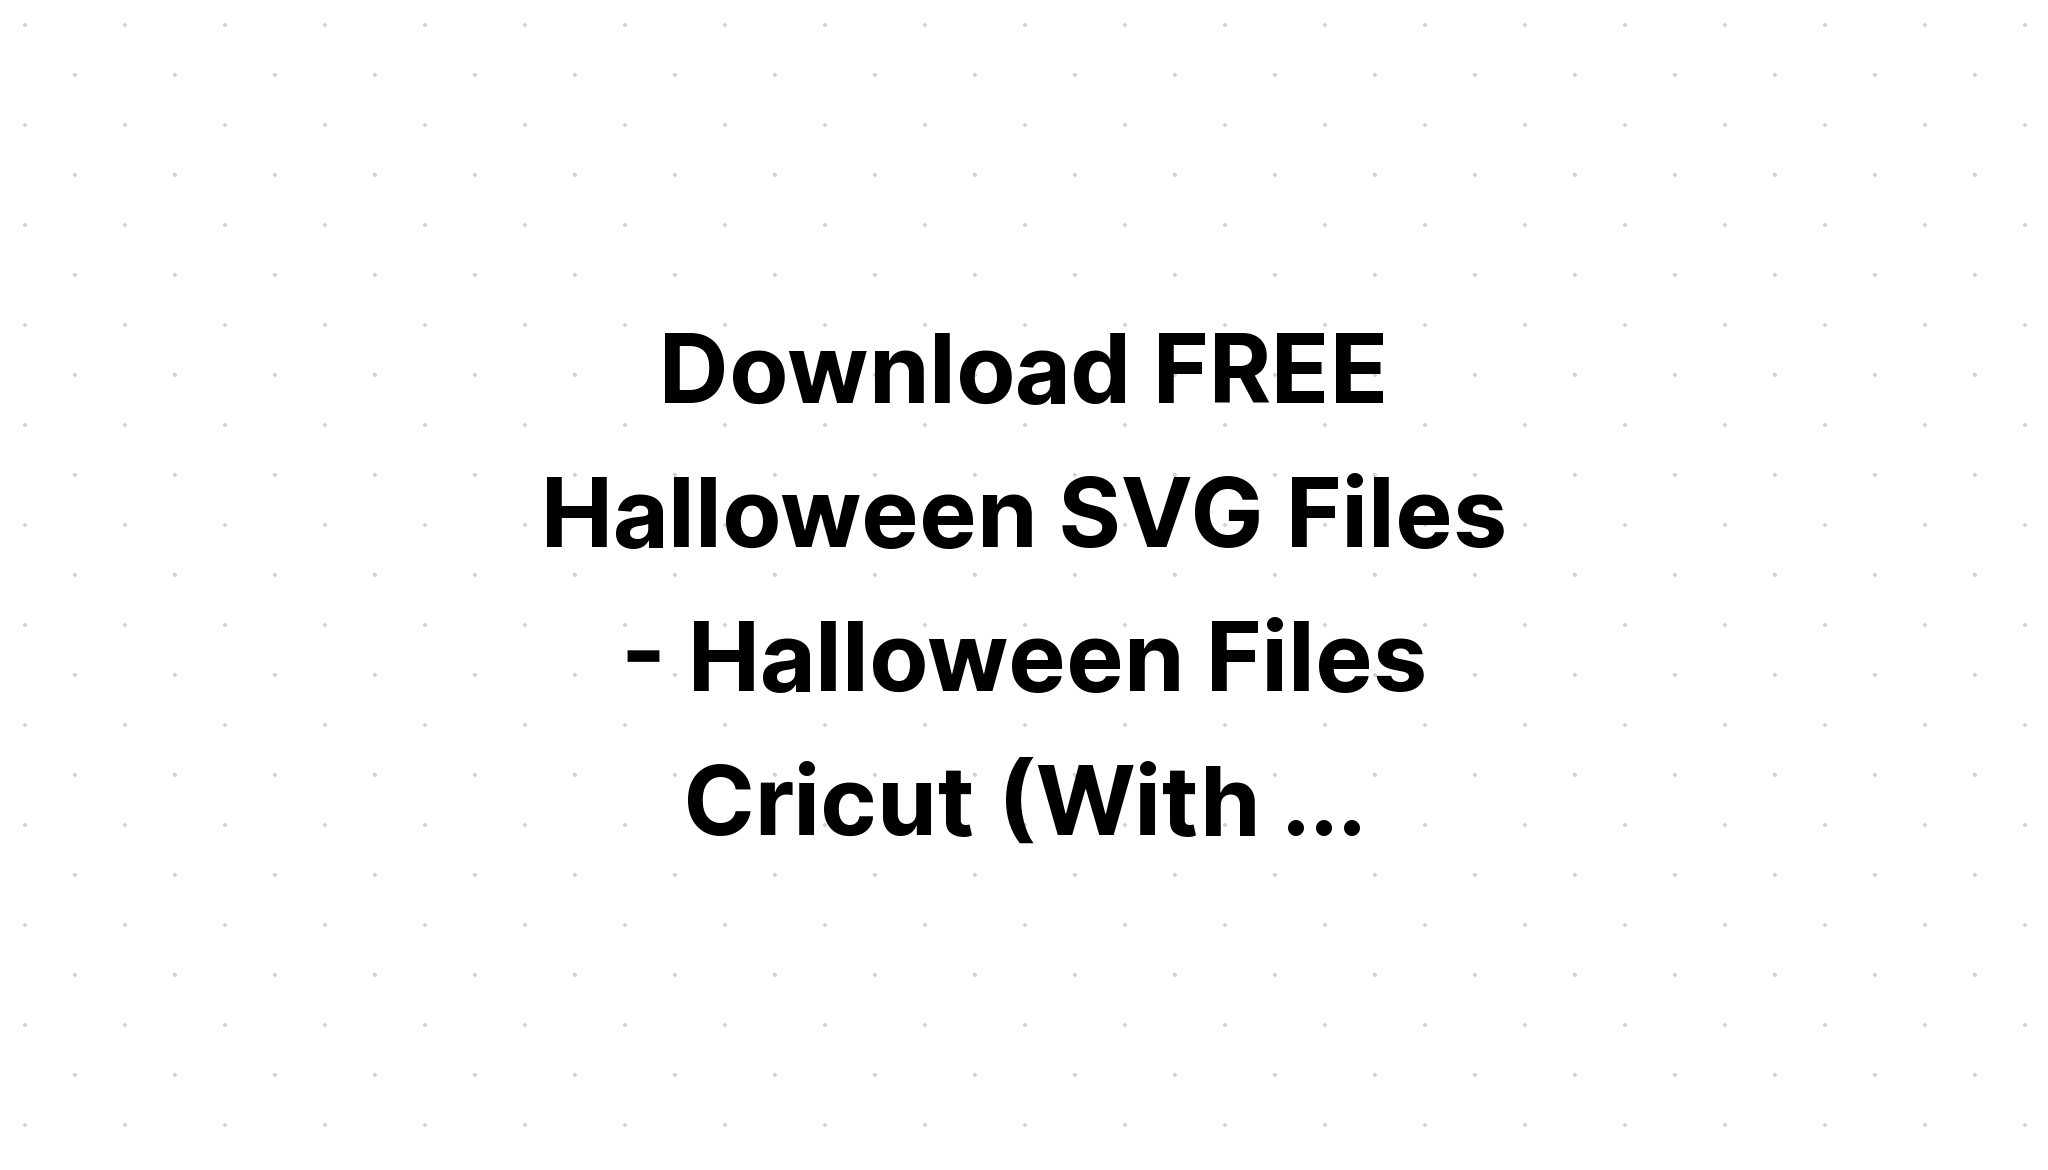 Download Free Svg Cut Files For Cricut Decorations - Layered SVG Cut File